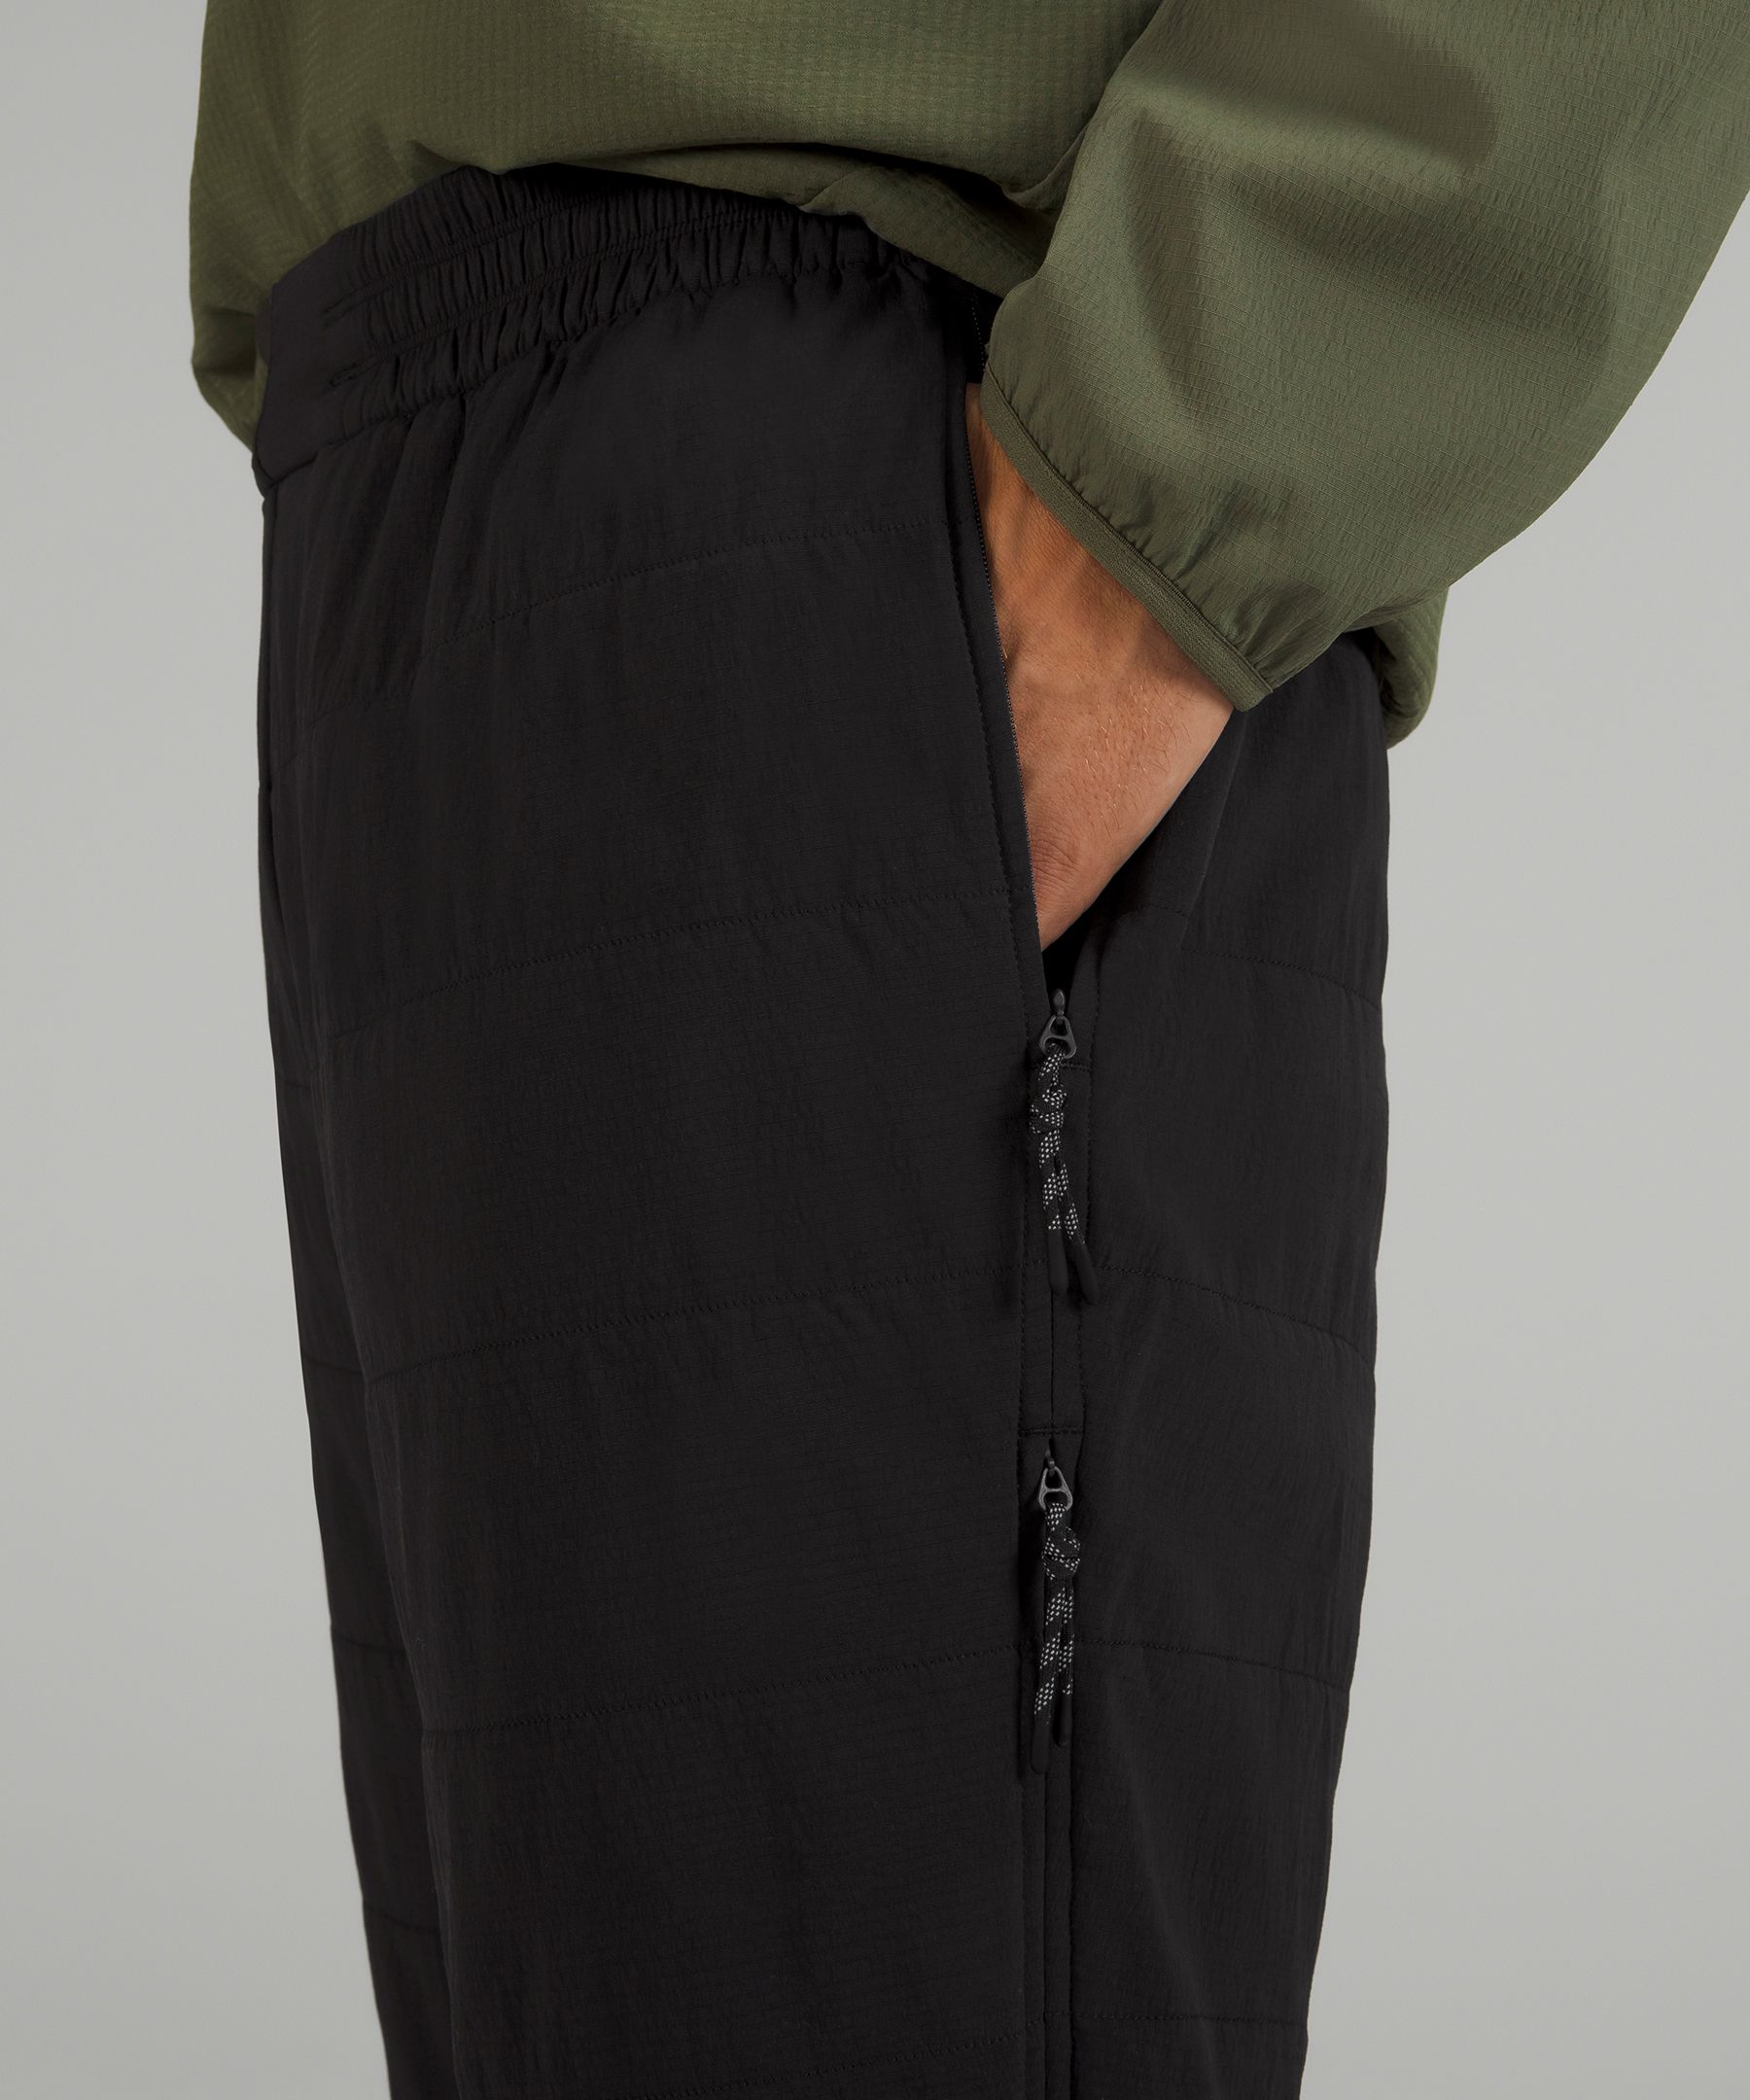 Insulated Hiking Pant, Men's Joggers